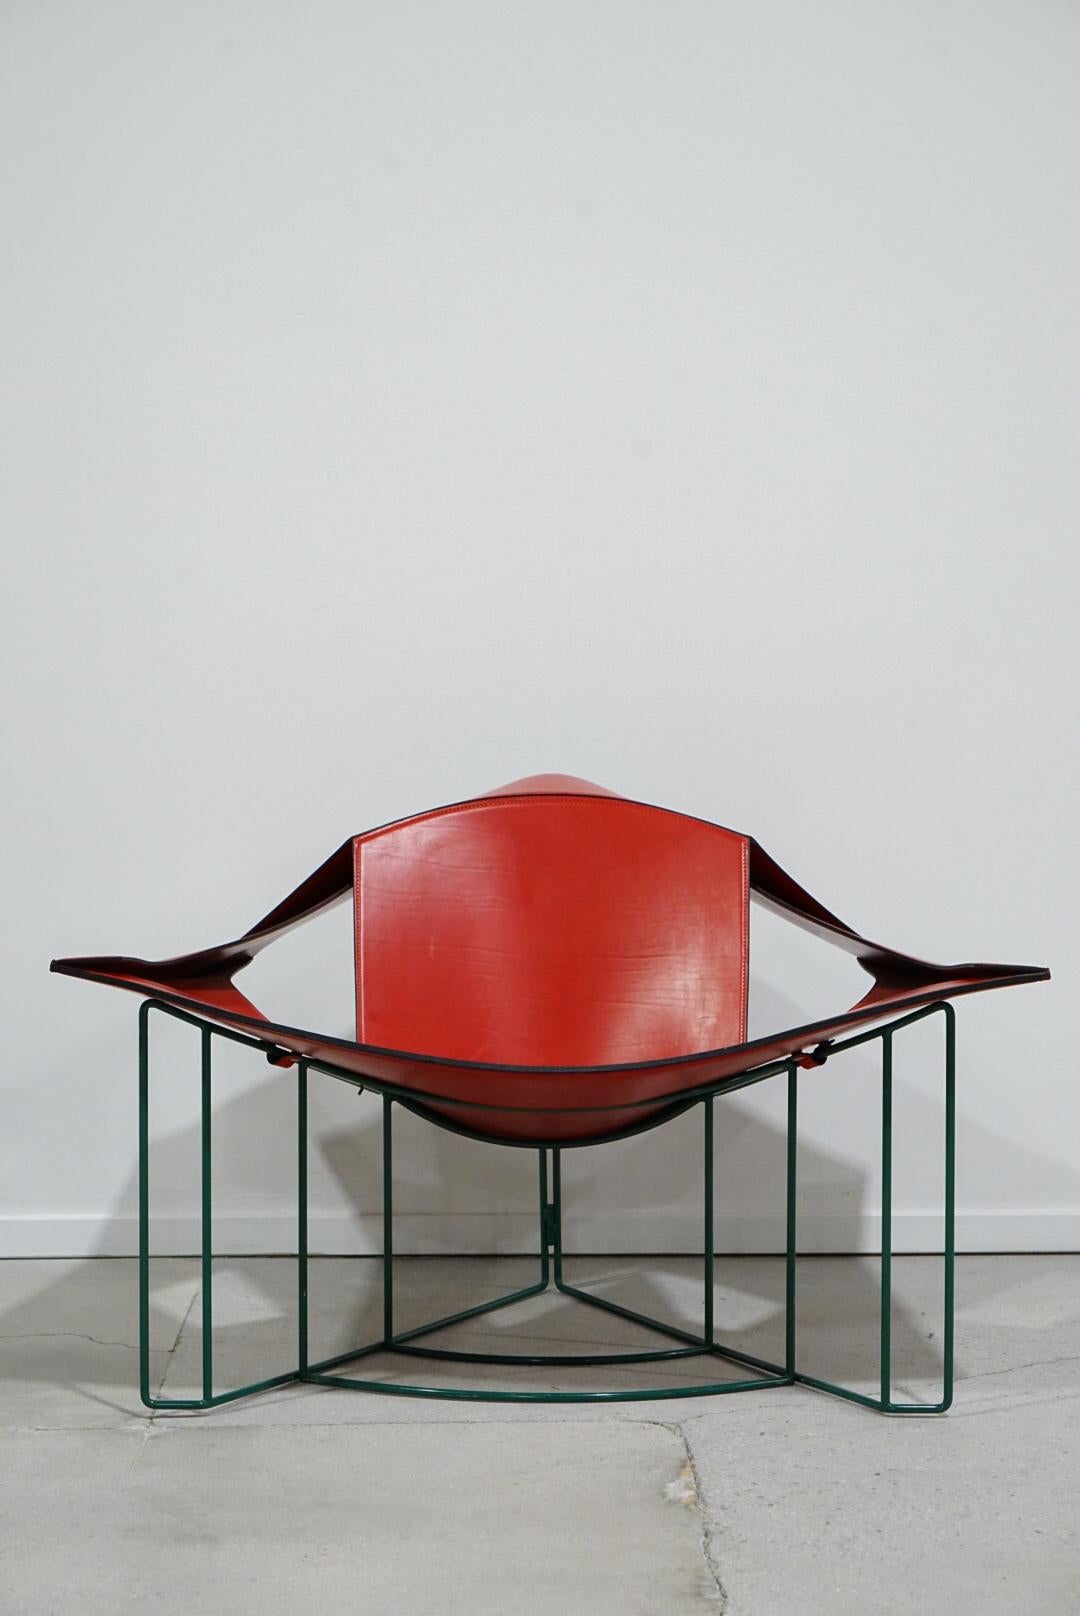 Stunning Lounge chair designed by Jacques Harold Pollard for Matteo Grassi Italy in 1987. Chair is red leather with light patina as pictured and a custom green powder coated frame. This chair is a true work of functional art and a statement piece.